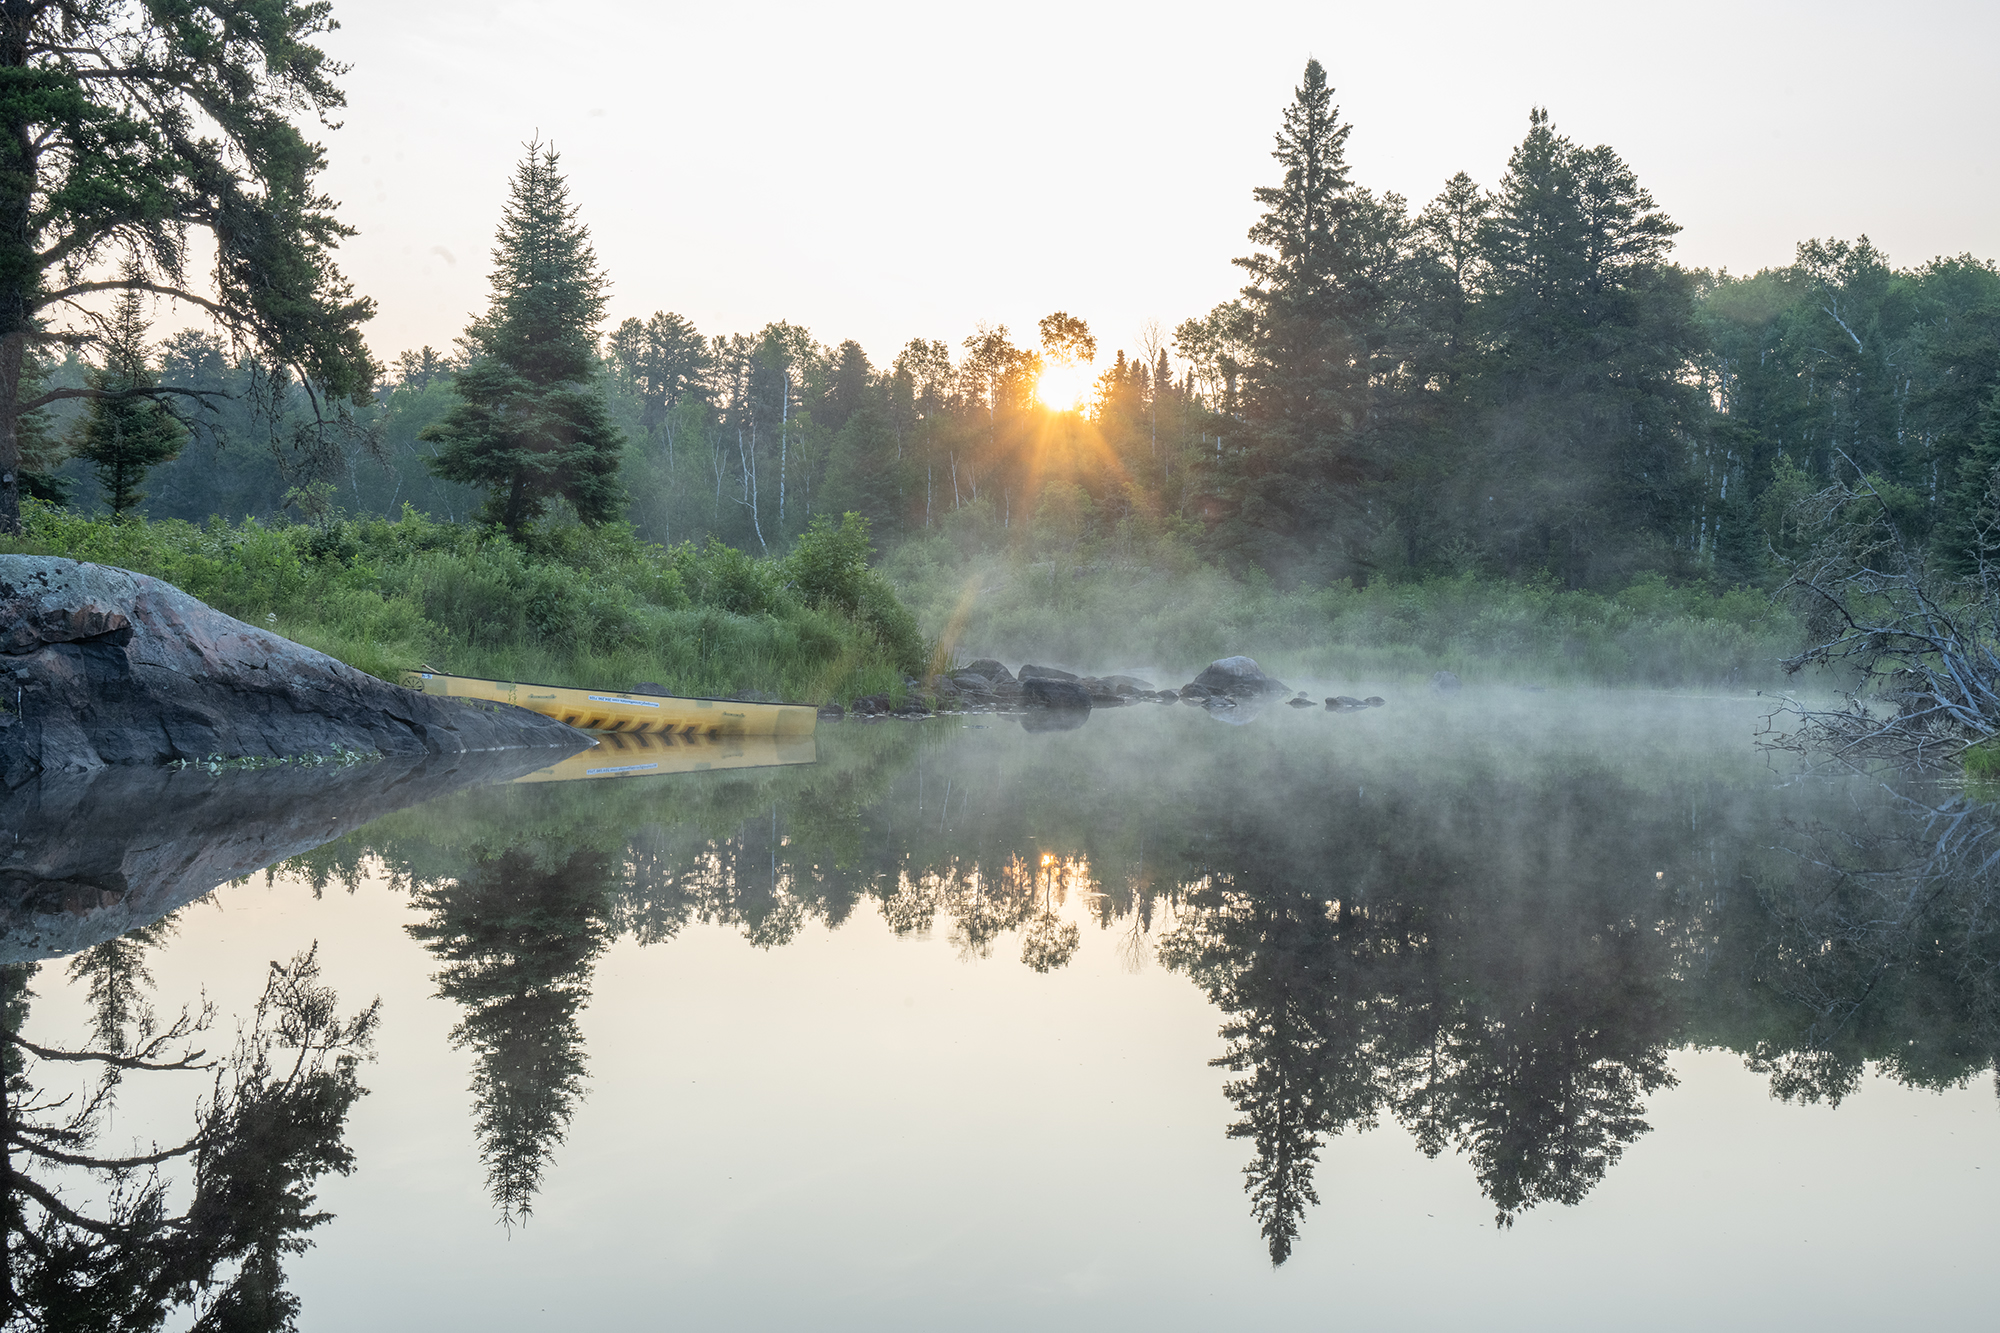 A yellow canoe sits on the lower Bird River during a foggy sunrise